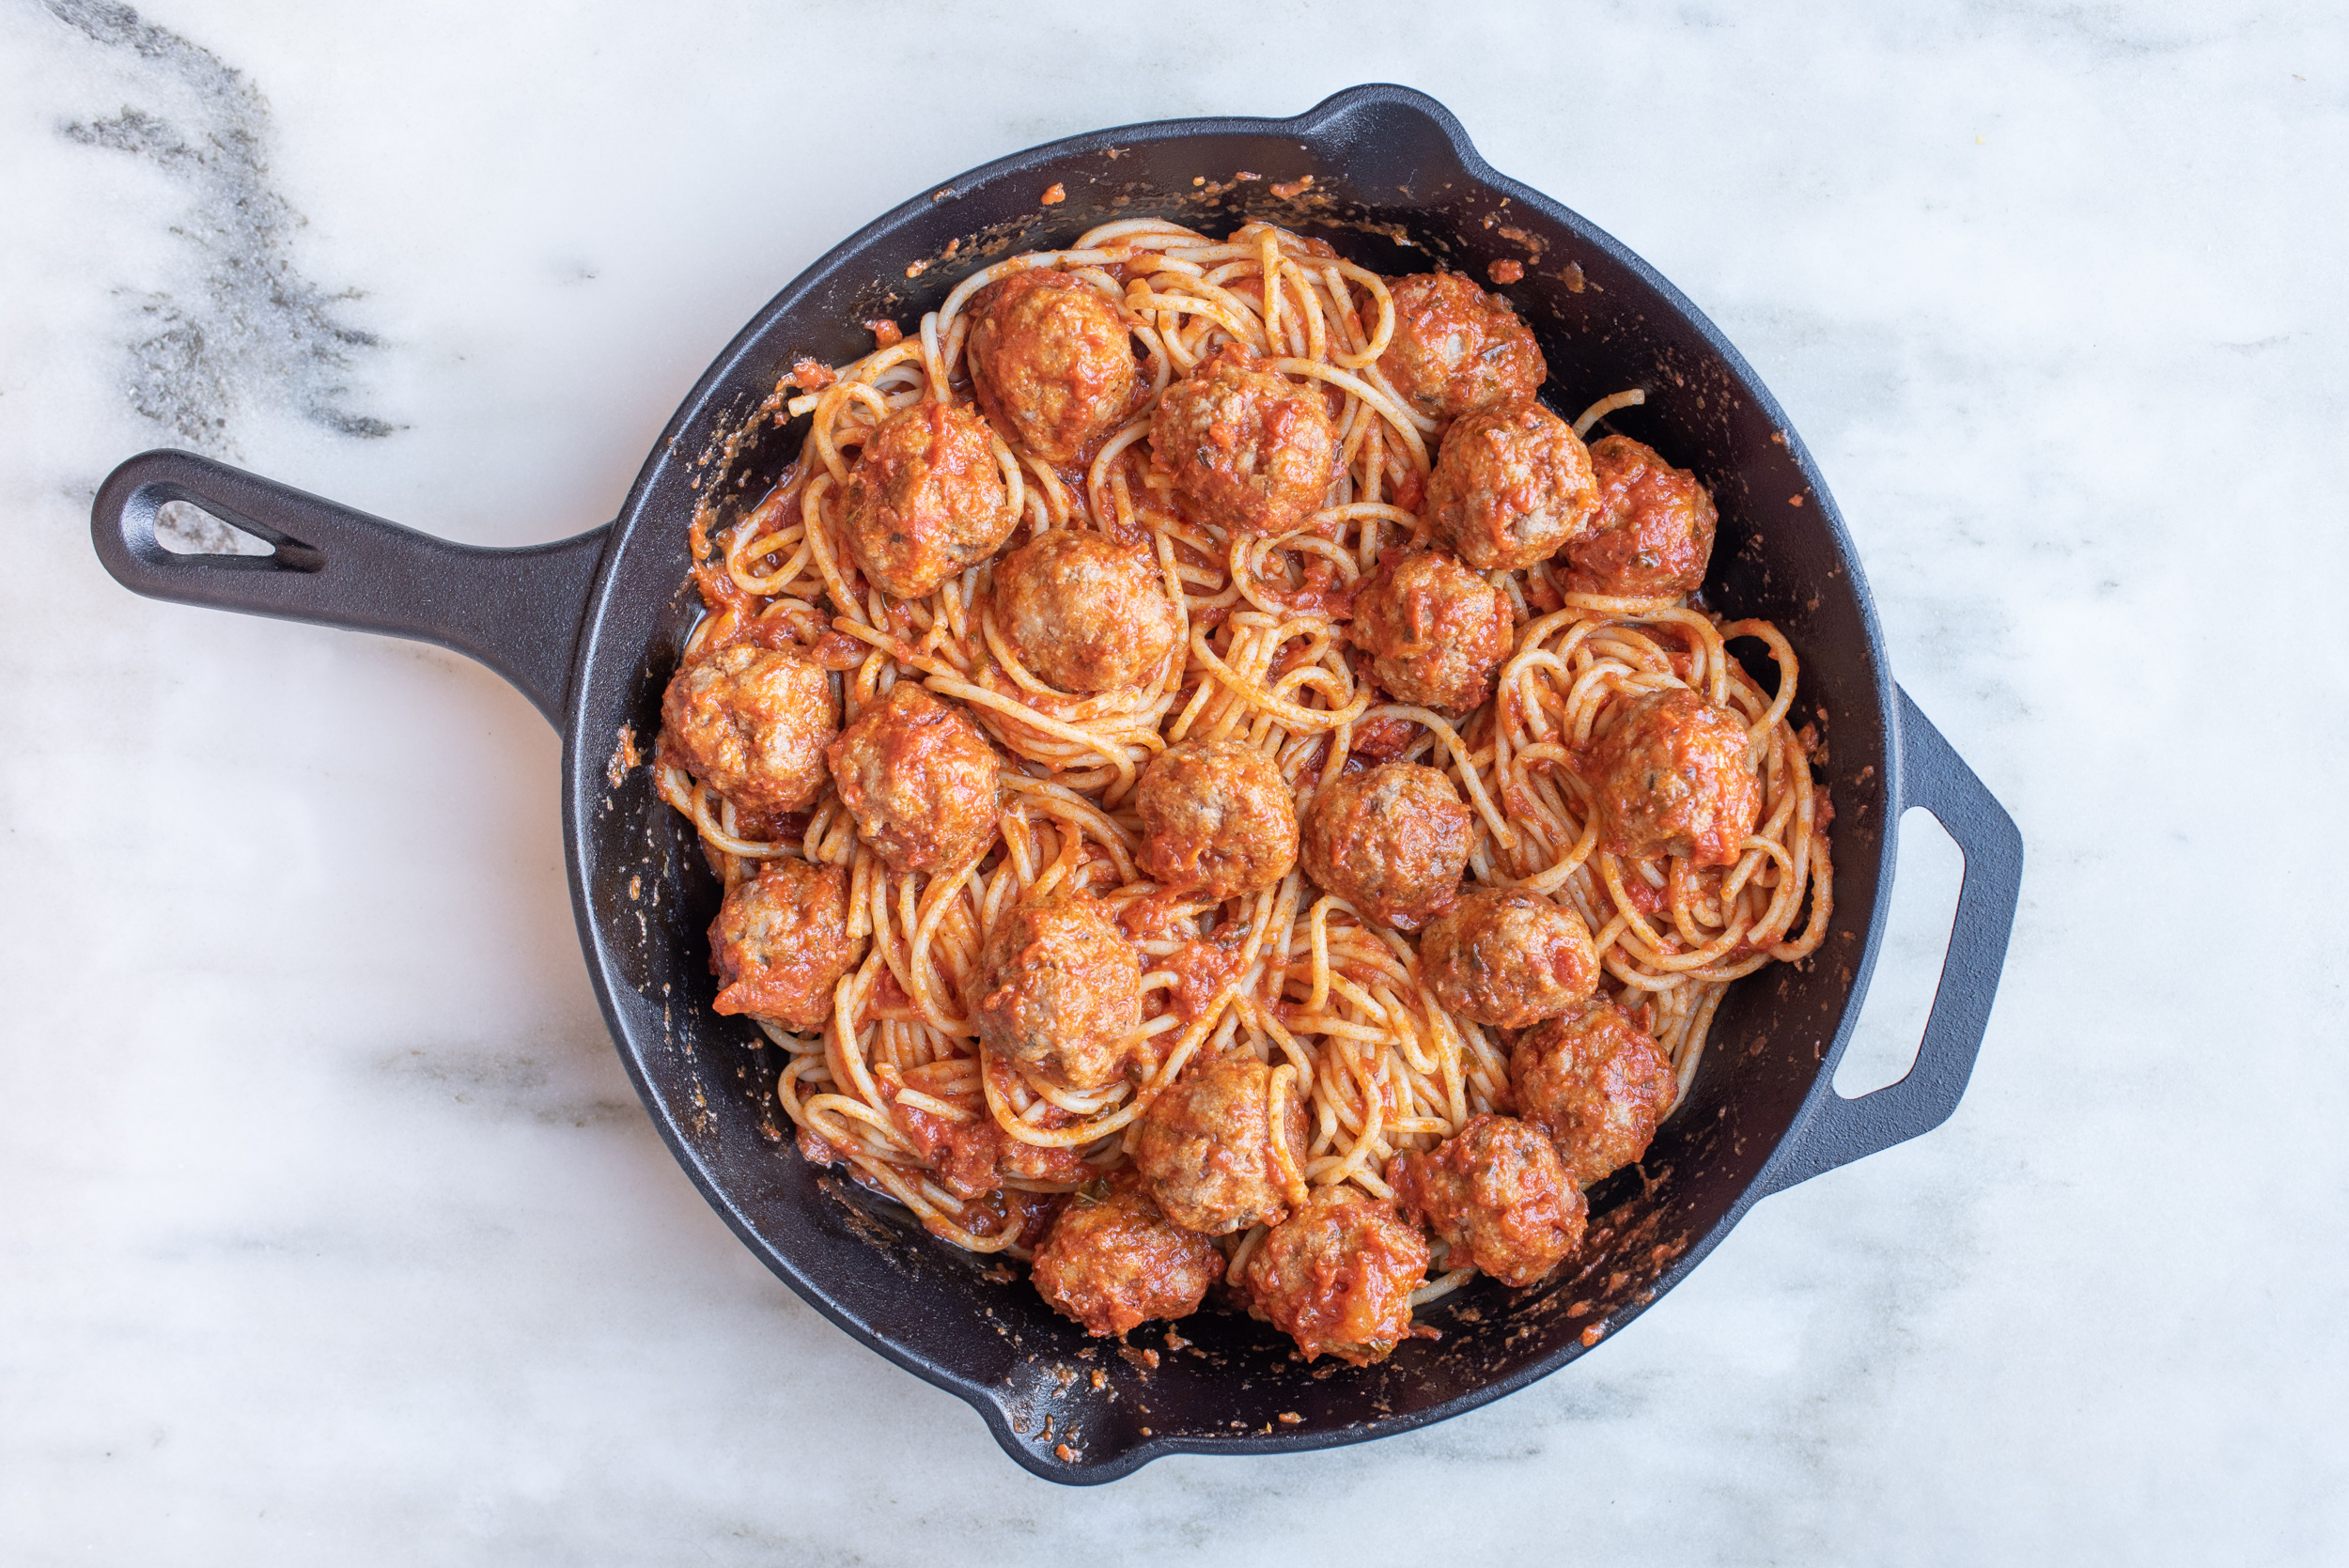 a large cast iron skillet filled with spaghetti and lamb meatballs coated in tomato sauce